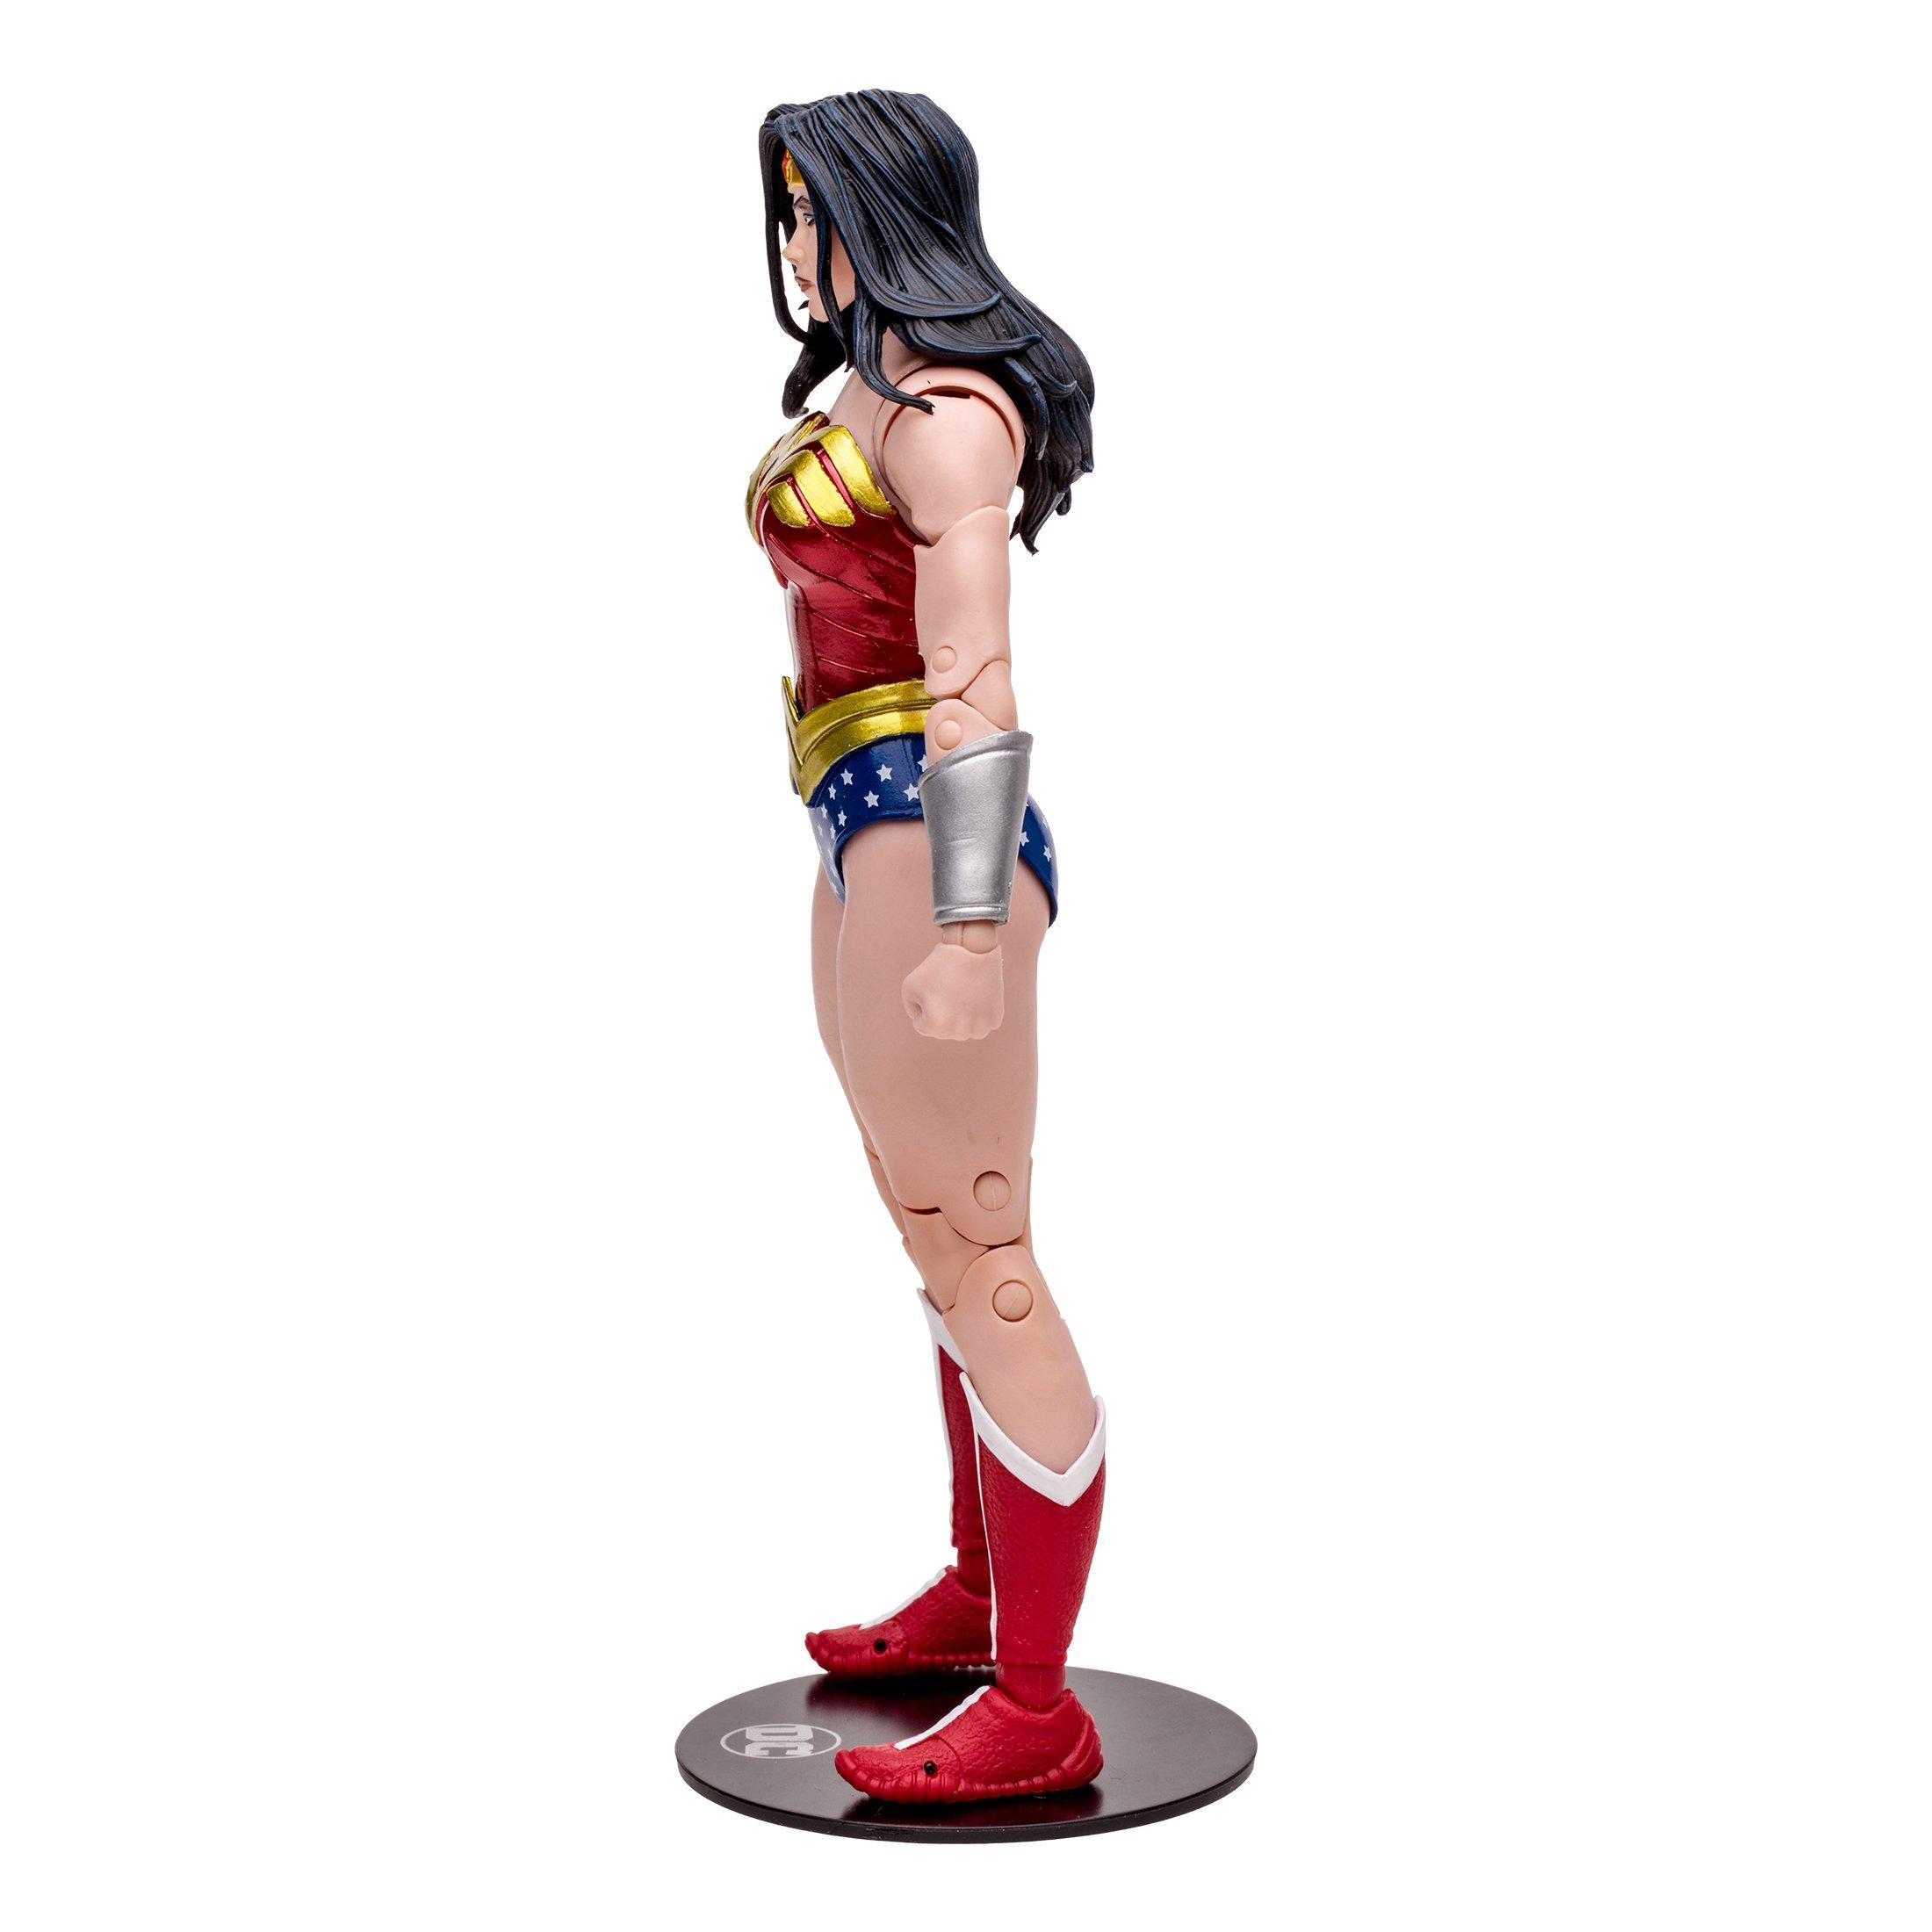 Wonder Woman - To celebrate #WonderWomanDay here is a FIRST LOOK at the Wonder  Woman™ 7” scale figure from McFarlane Toys! Coming soon… A groundbreaking  new era for a DC icon continues